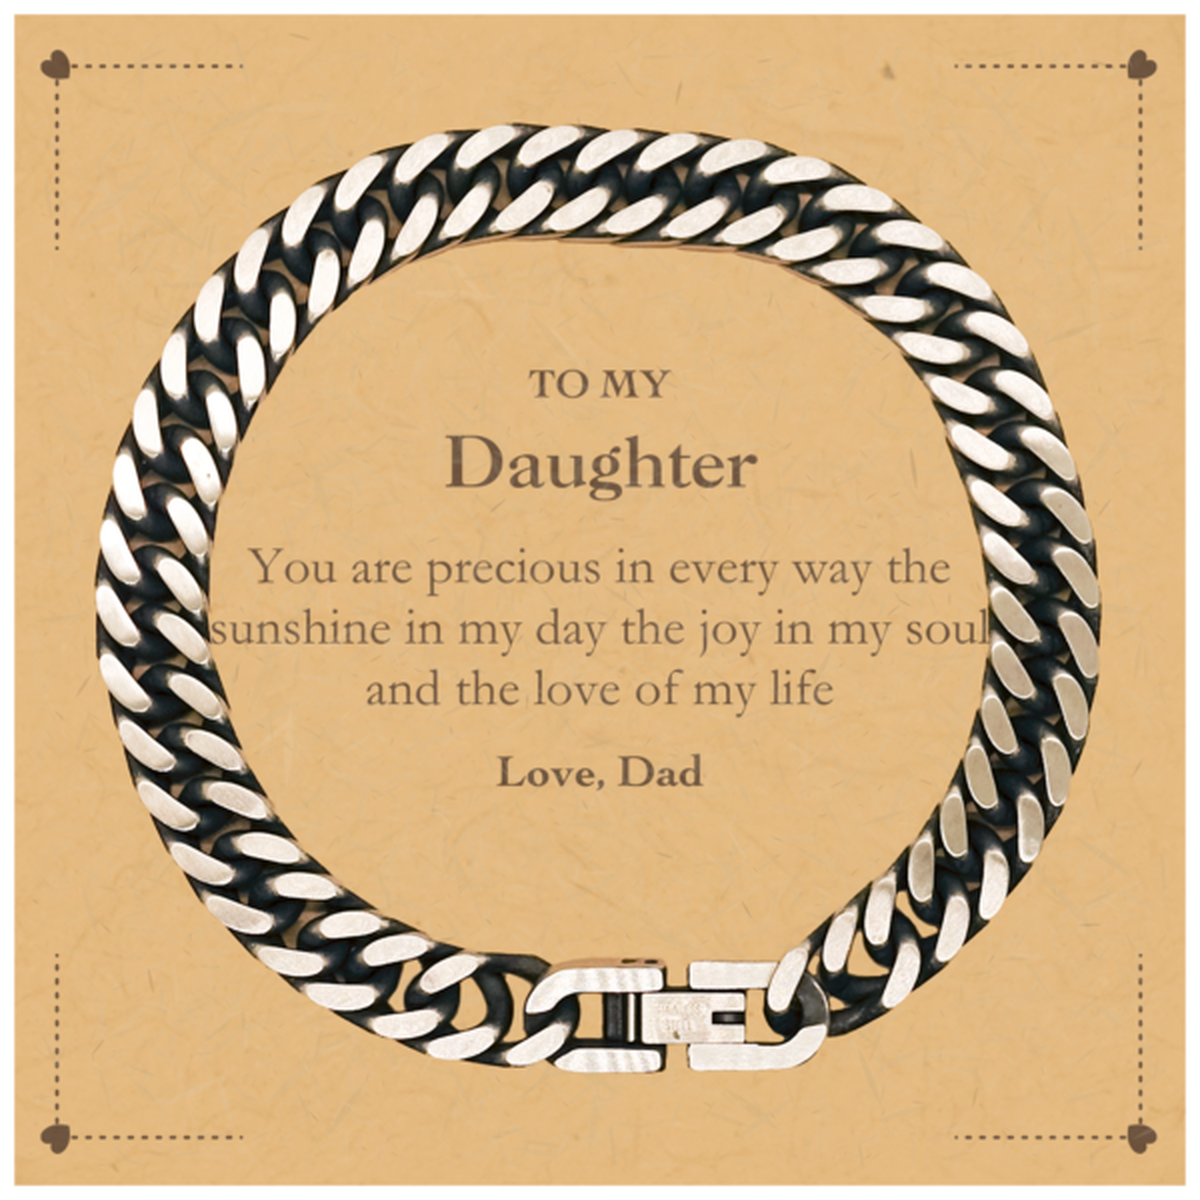 Graduation Gifts for Daughter Cuban Link Chain Bracelet Present from Dad, Christmas Daughter Birthday Gifts Daughter You are precious in every way the sunshine in my day. Love, Dad